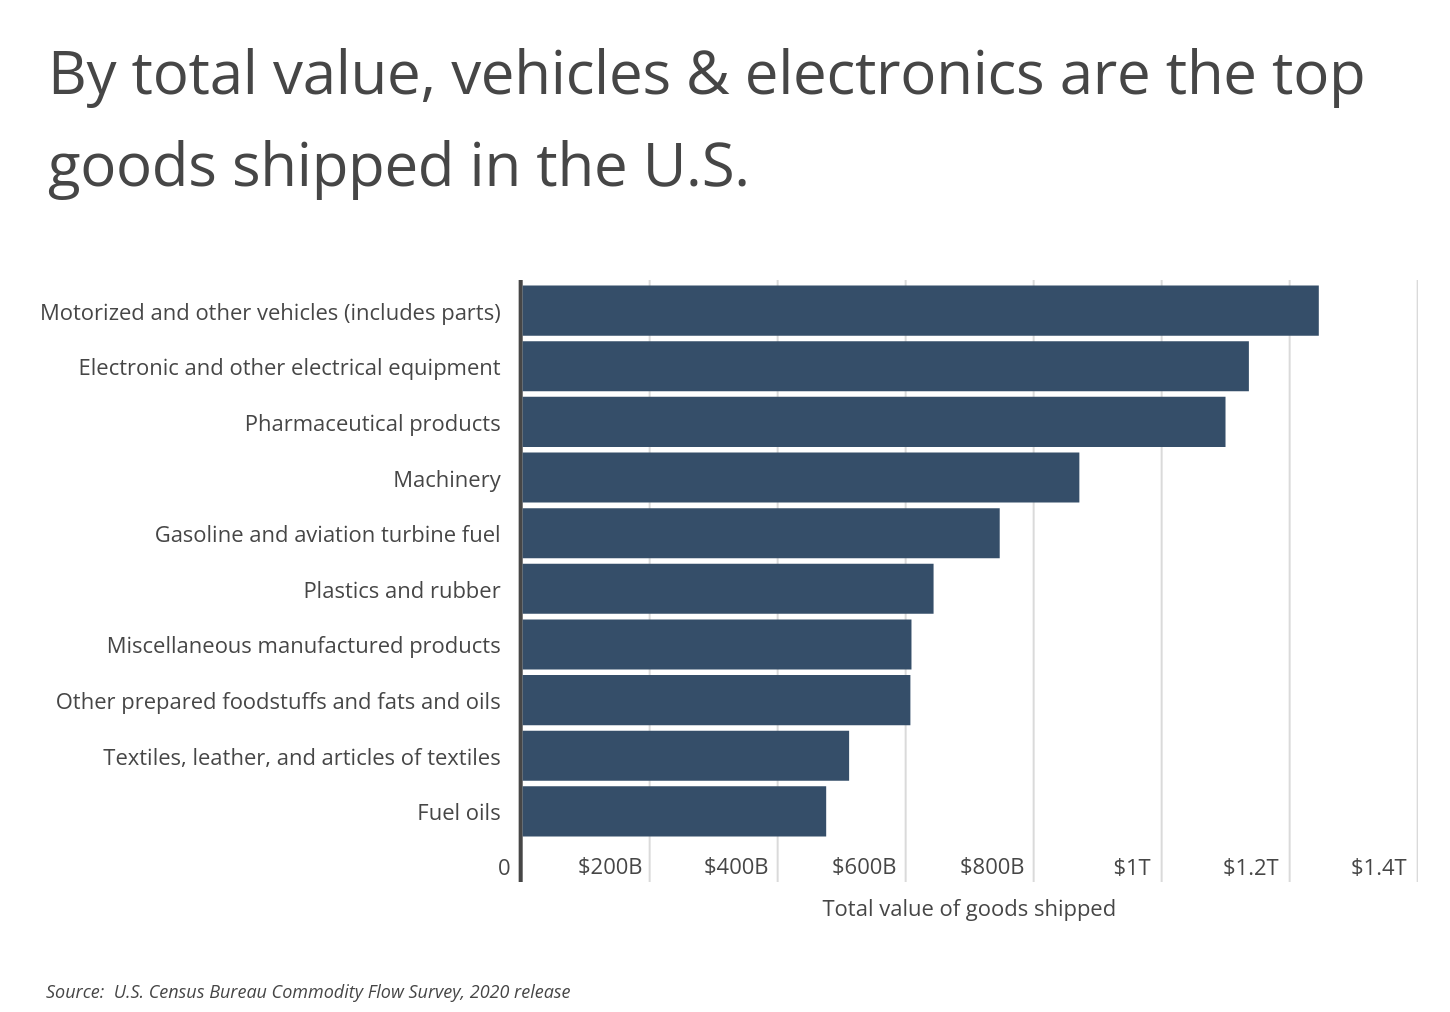 Chart3_Vehicles & electronics are the top goods shipped in US by total value